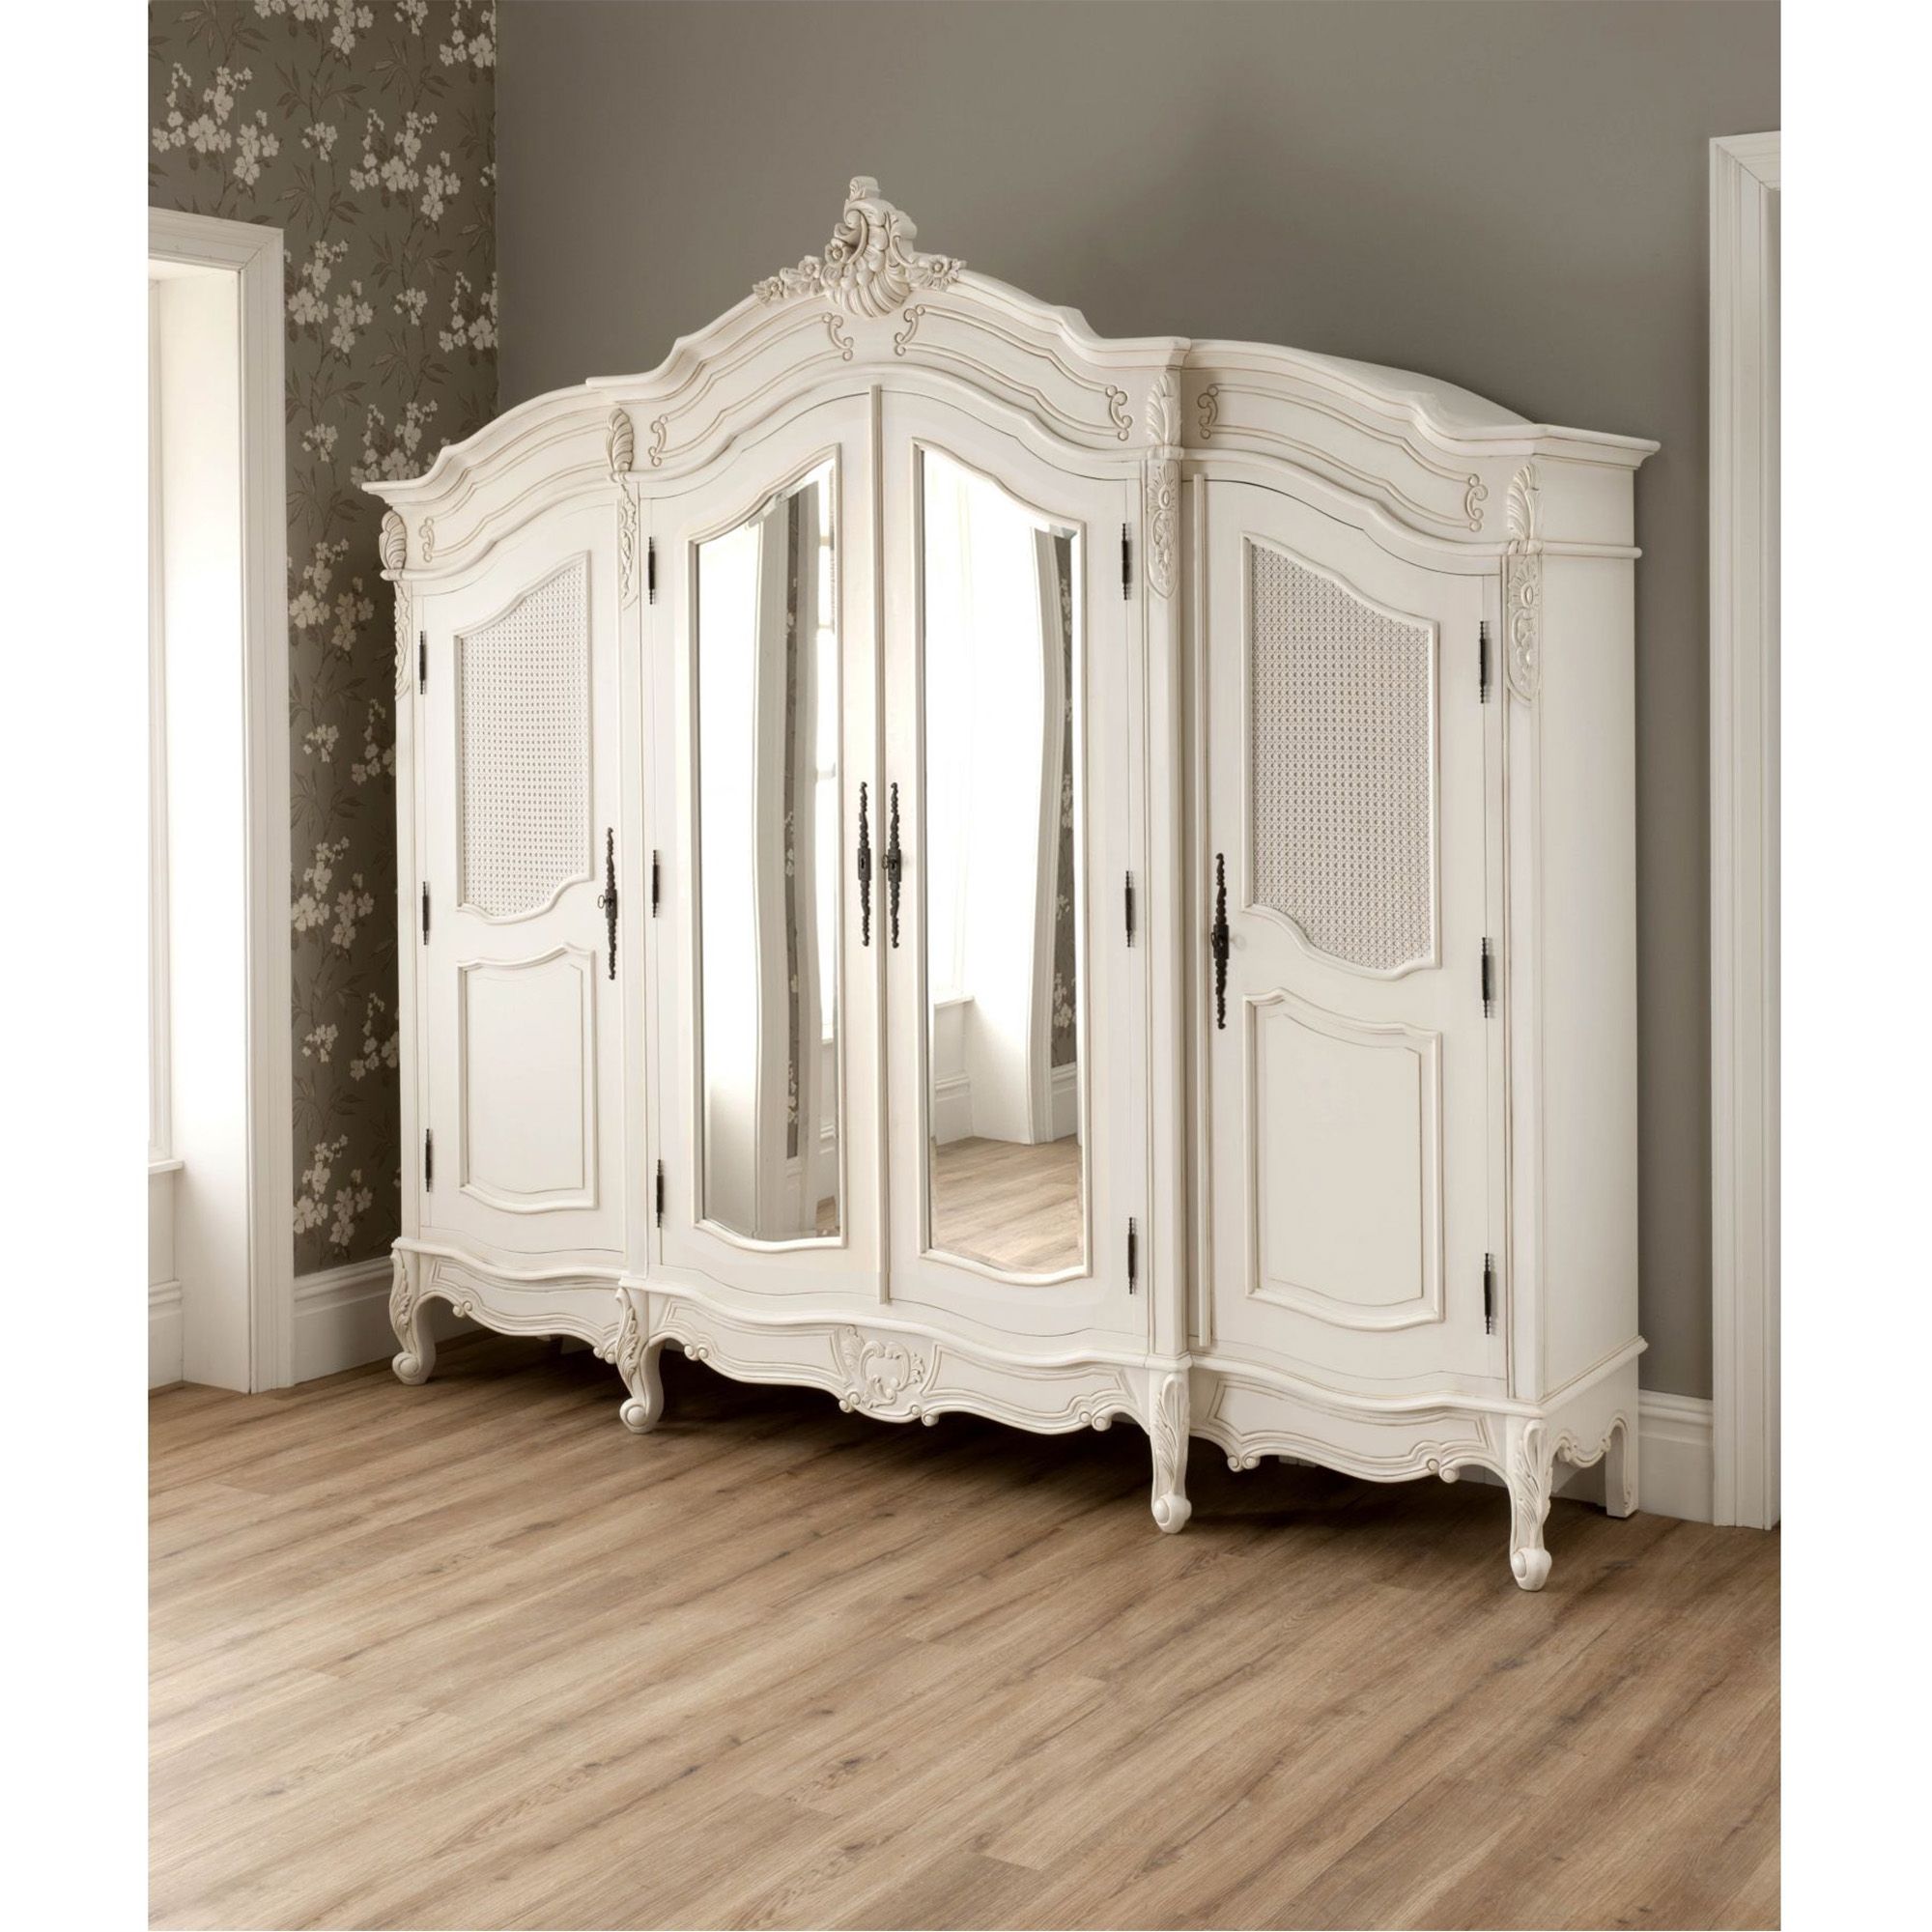 Antique French Wardrobe | Vintage Wardrobes | Antique Wardrobes | Intended For White Antique Wardrobes (View 6 of 15)